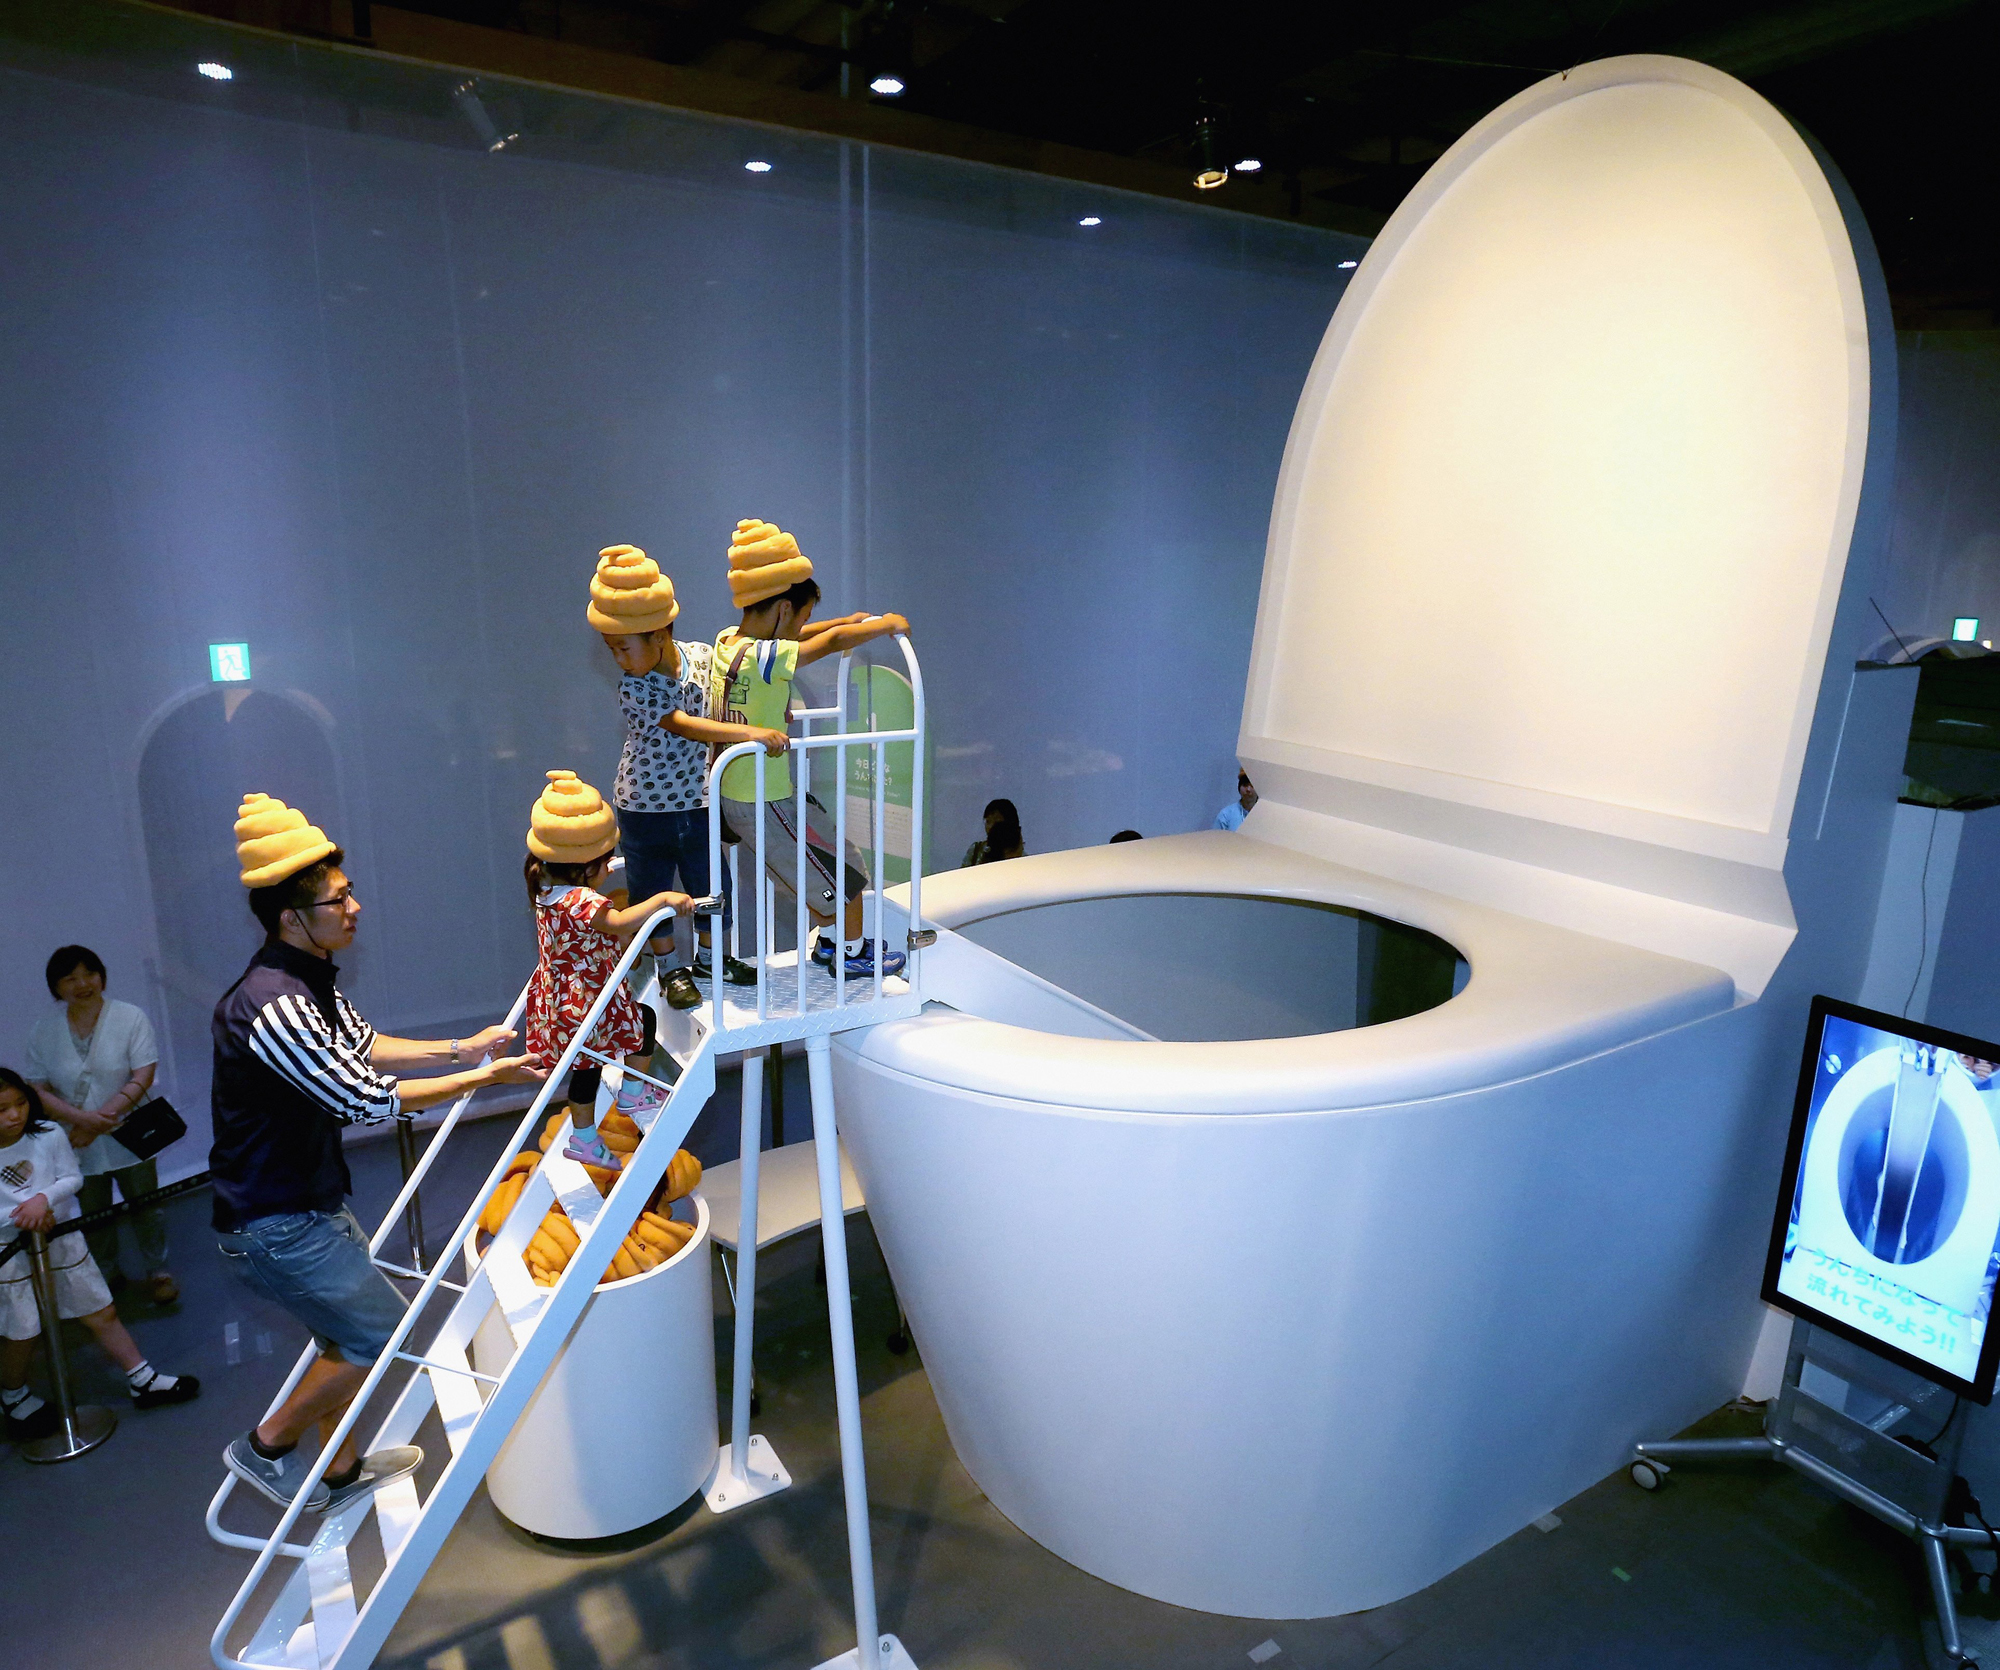 Children play at the 5-meter-tall toilet shaped slider during the 'Toilet!? Human Waste and Earth's Future' exhibition at The National Museum of Emerging Science and Innovation - Miraikan on July 5, 2014 in Tokyo.